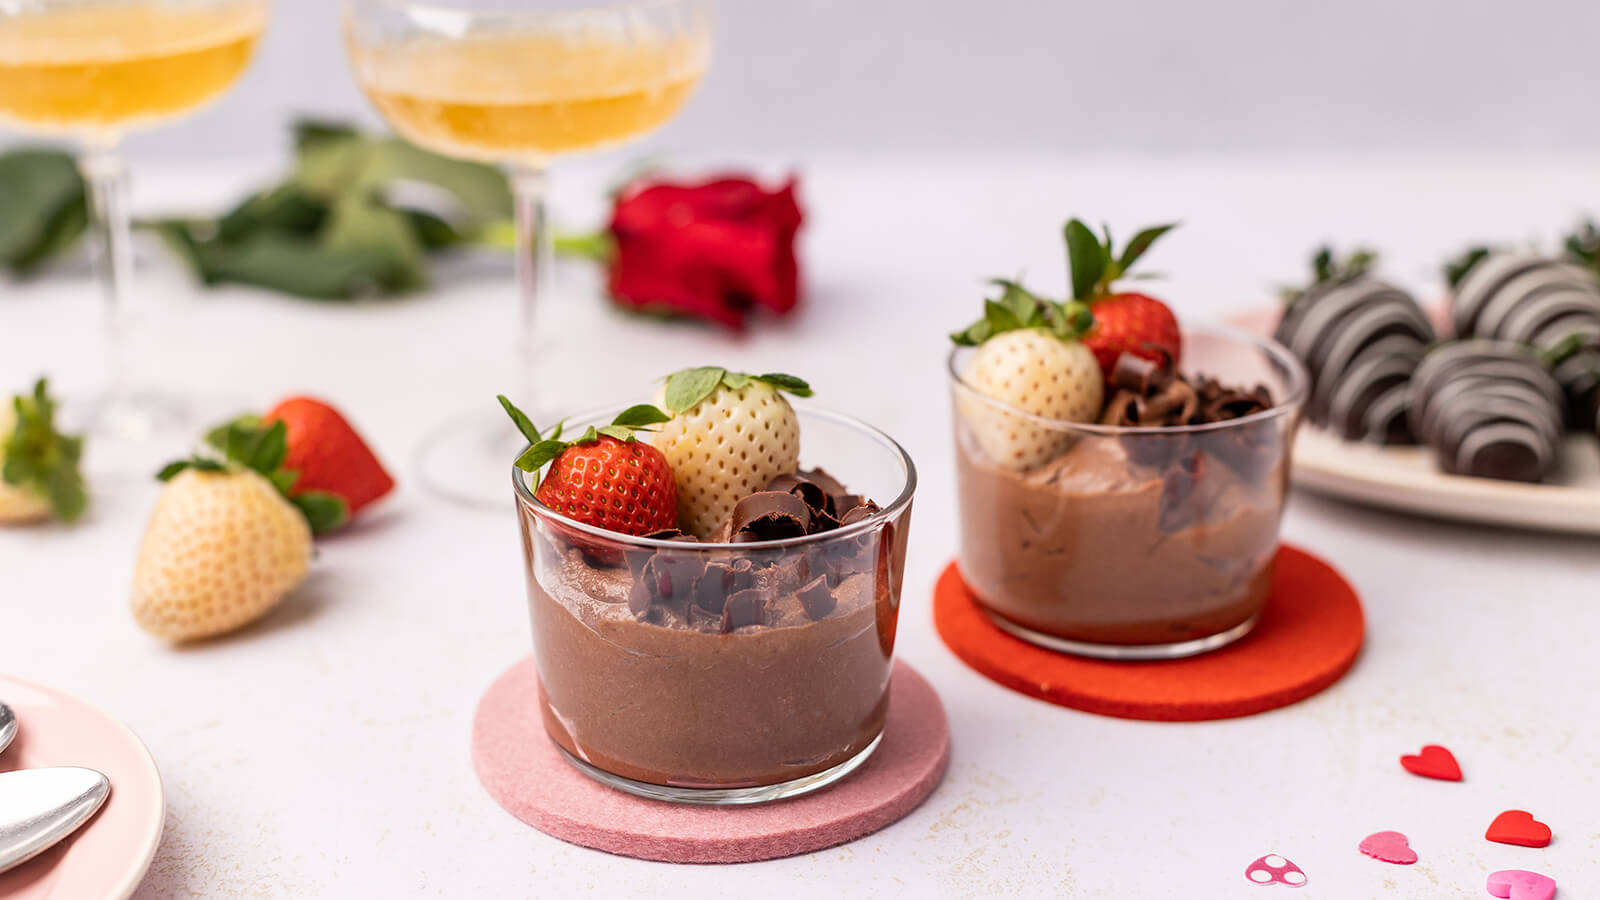 Cool and Spicy Chocolate Pudding